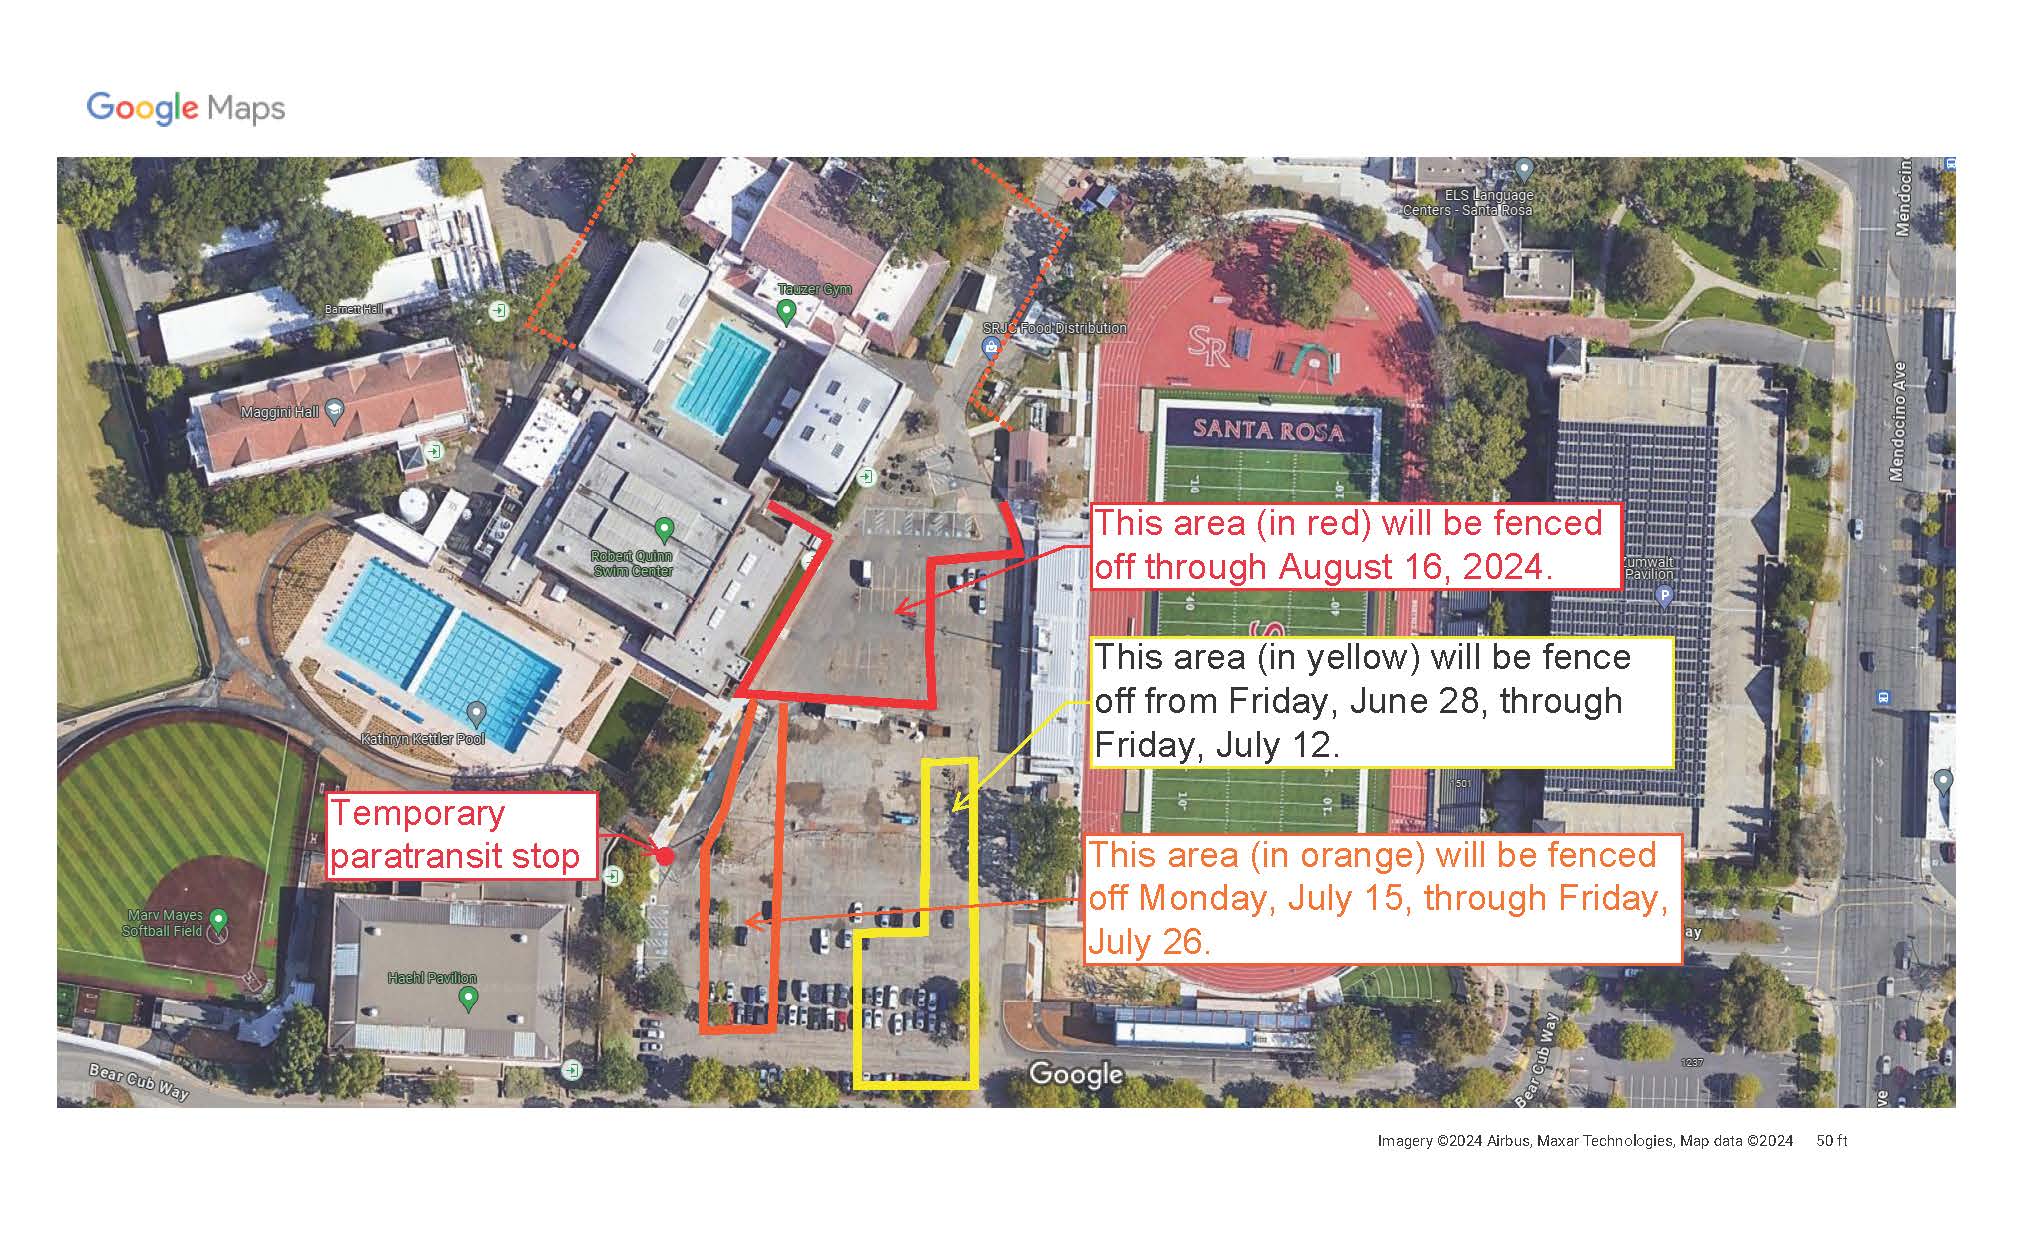 Please note the various closures: •	From May 28, 2024, through August 16, 2024, the north section of C Parking Lot will be closed.  •	From June 28, 2024, through July 12, 2024, the southeast section of C Parking Lot will be closed. •	From July 15, 2024, through July 26, 2024, the southwest section of C Parking Lot will be closed.  The paratransit stop at the east side of Quinn will be temporarily relocated in front of Haehl.   If you have any questions or concerns, please feel free to contact Project Manager Heather Chierici: hchierici@santarosa.edu    This project is funded by the Measure H Bond.   Thank you for your patience and understanding, as well as your continued support of the College District.